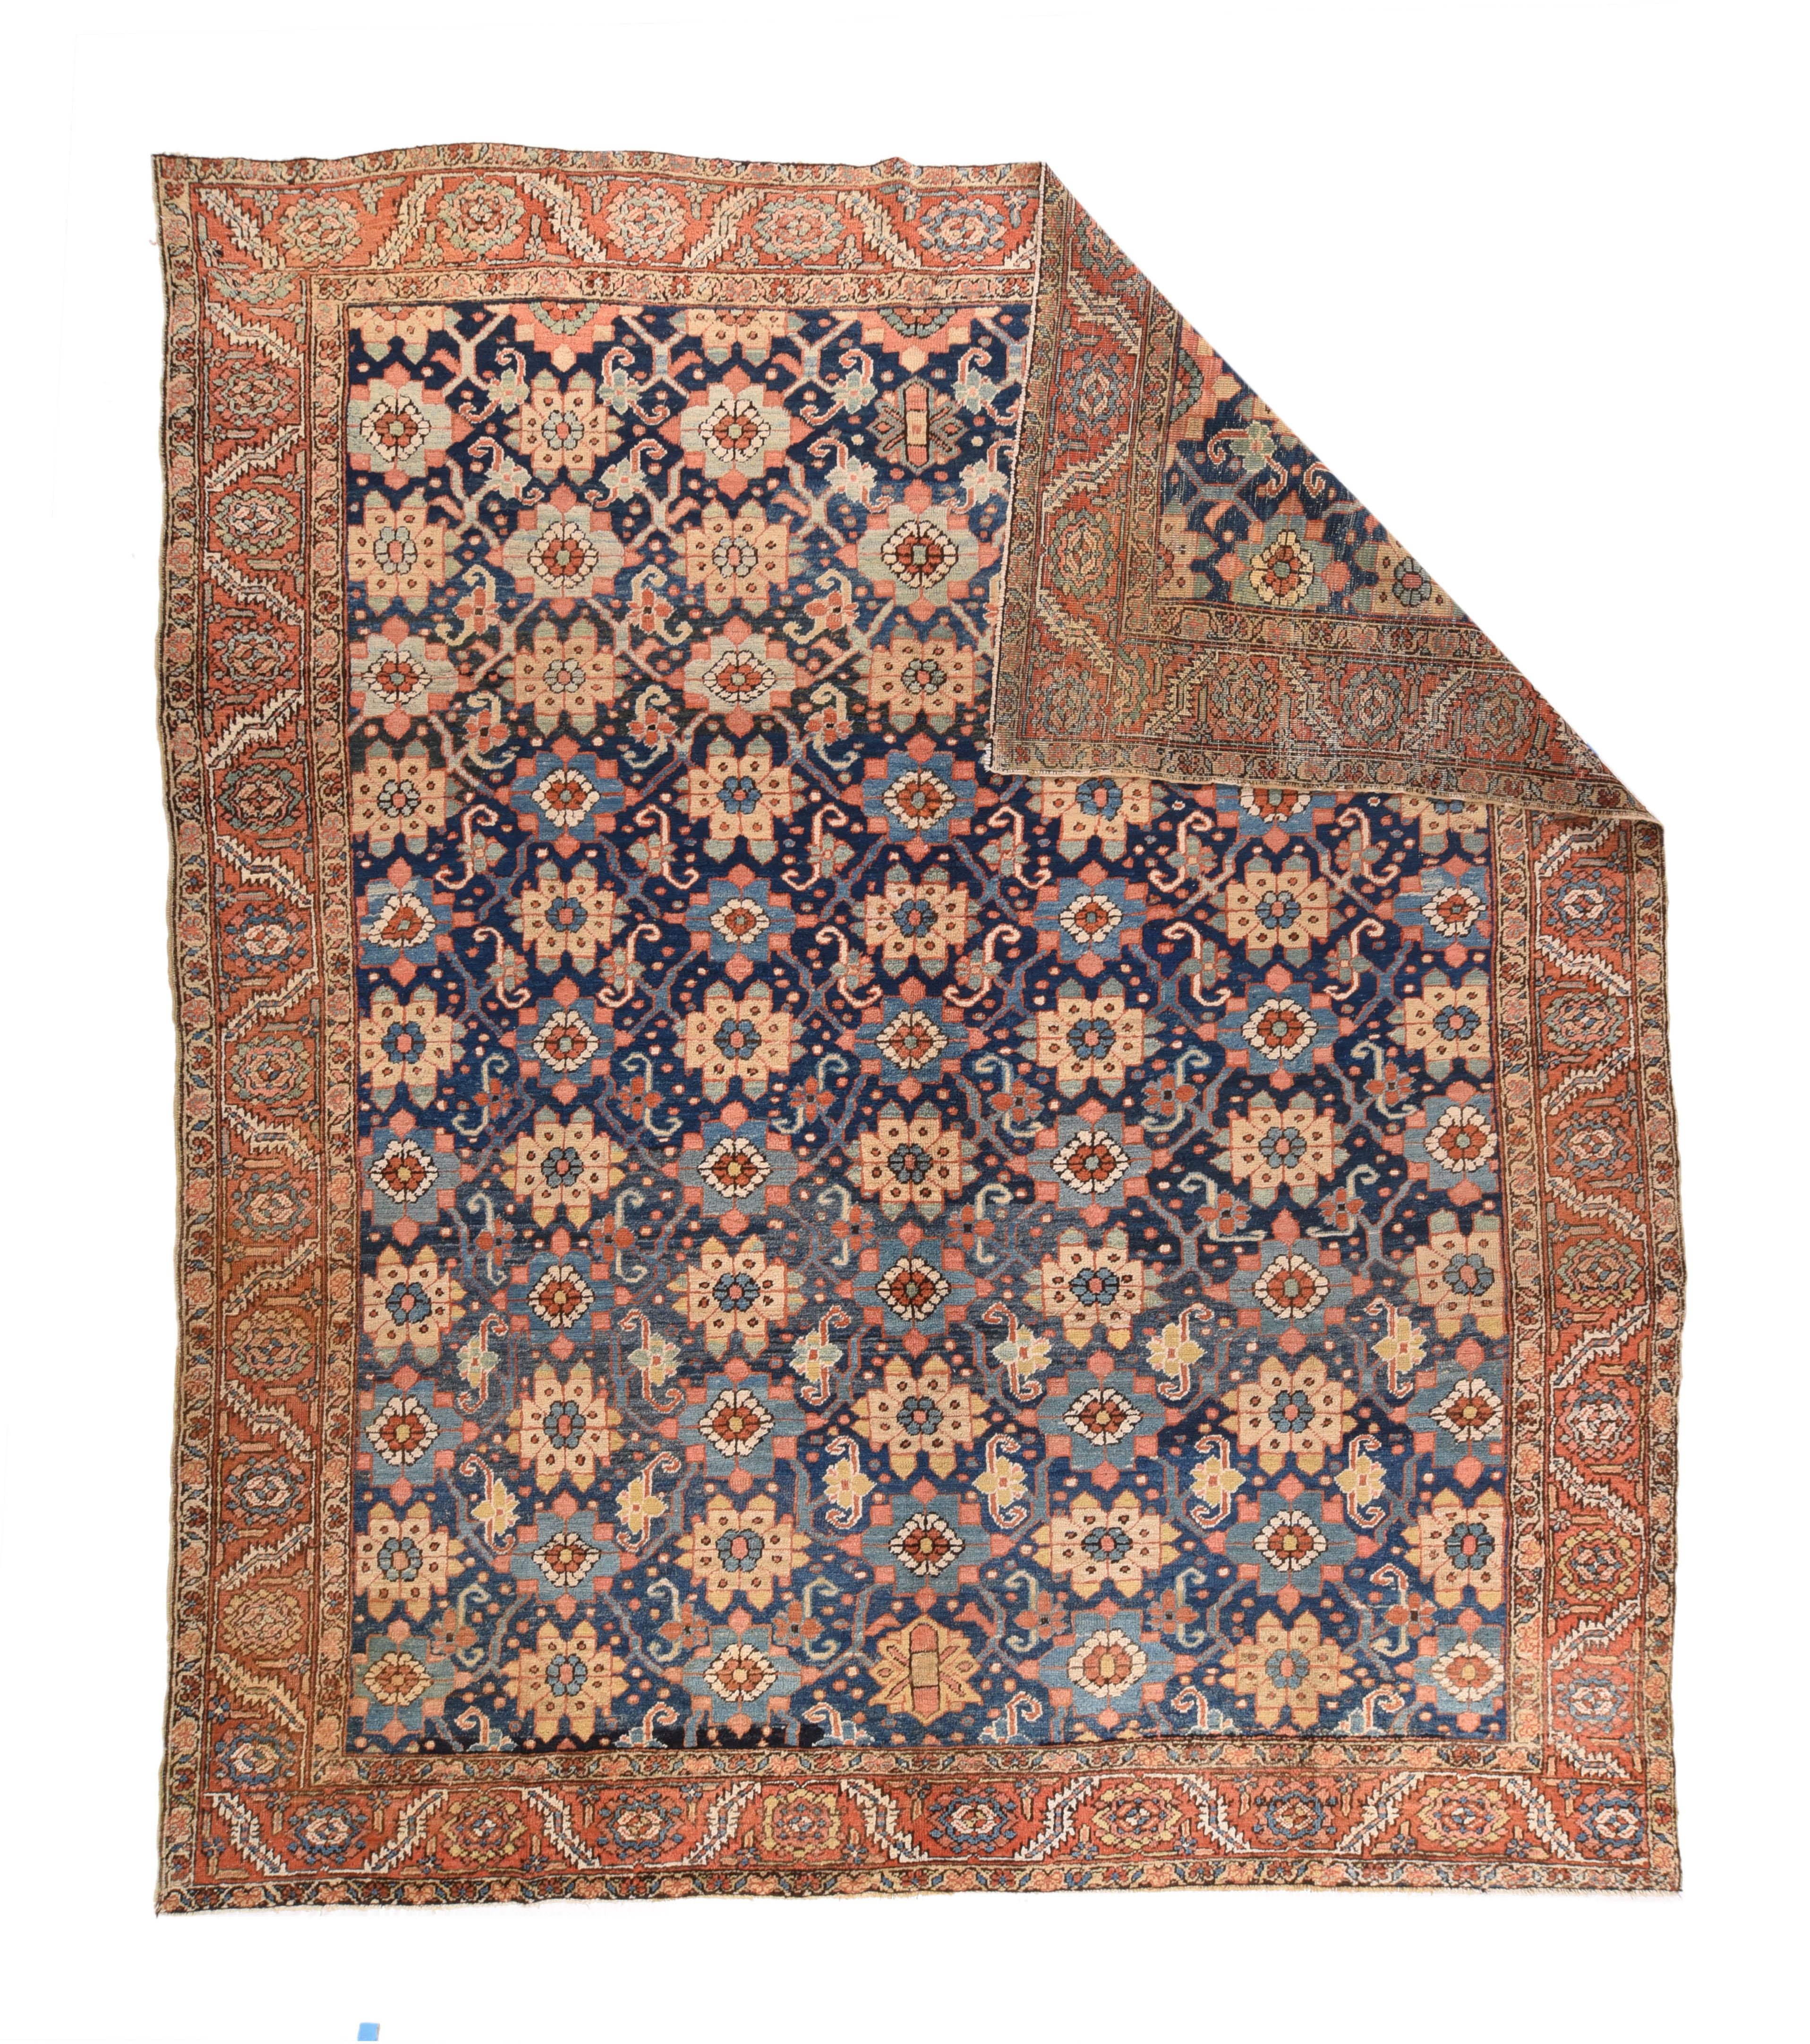 Antique Heriz Rug 9'10'' x 11'4''. The abrashed dark indigo field of this rustic Northwest Persian square carpet displays a modified Minsa Khani lattice of two rosette types, with lesser rosettes and small dots enlivening the ground. Rust strip